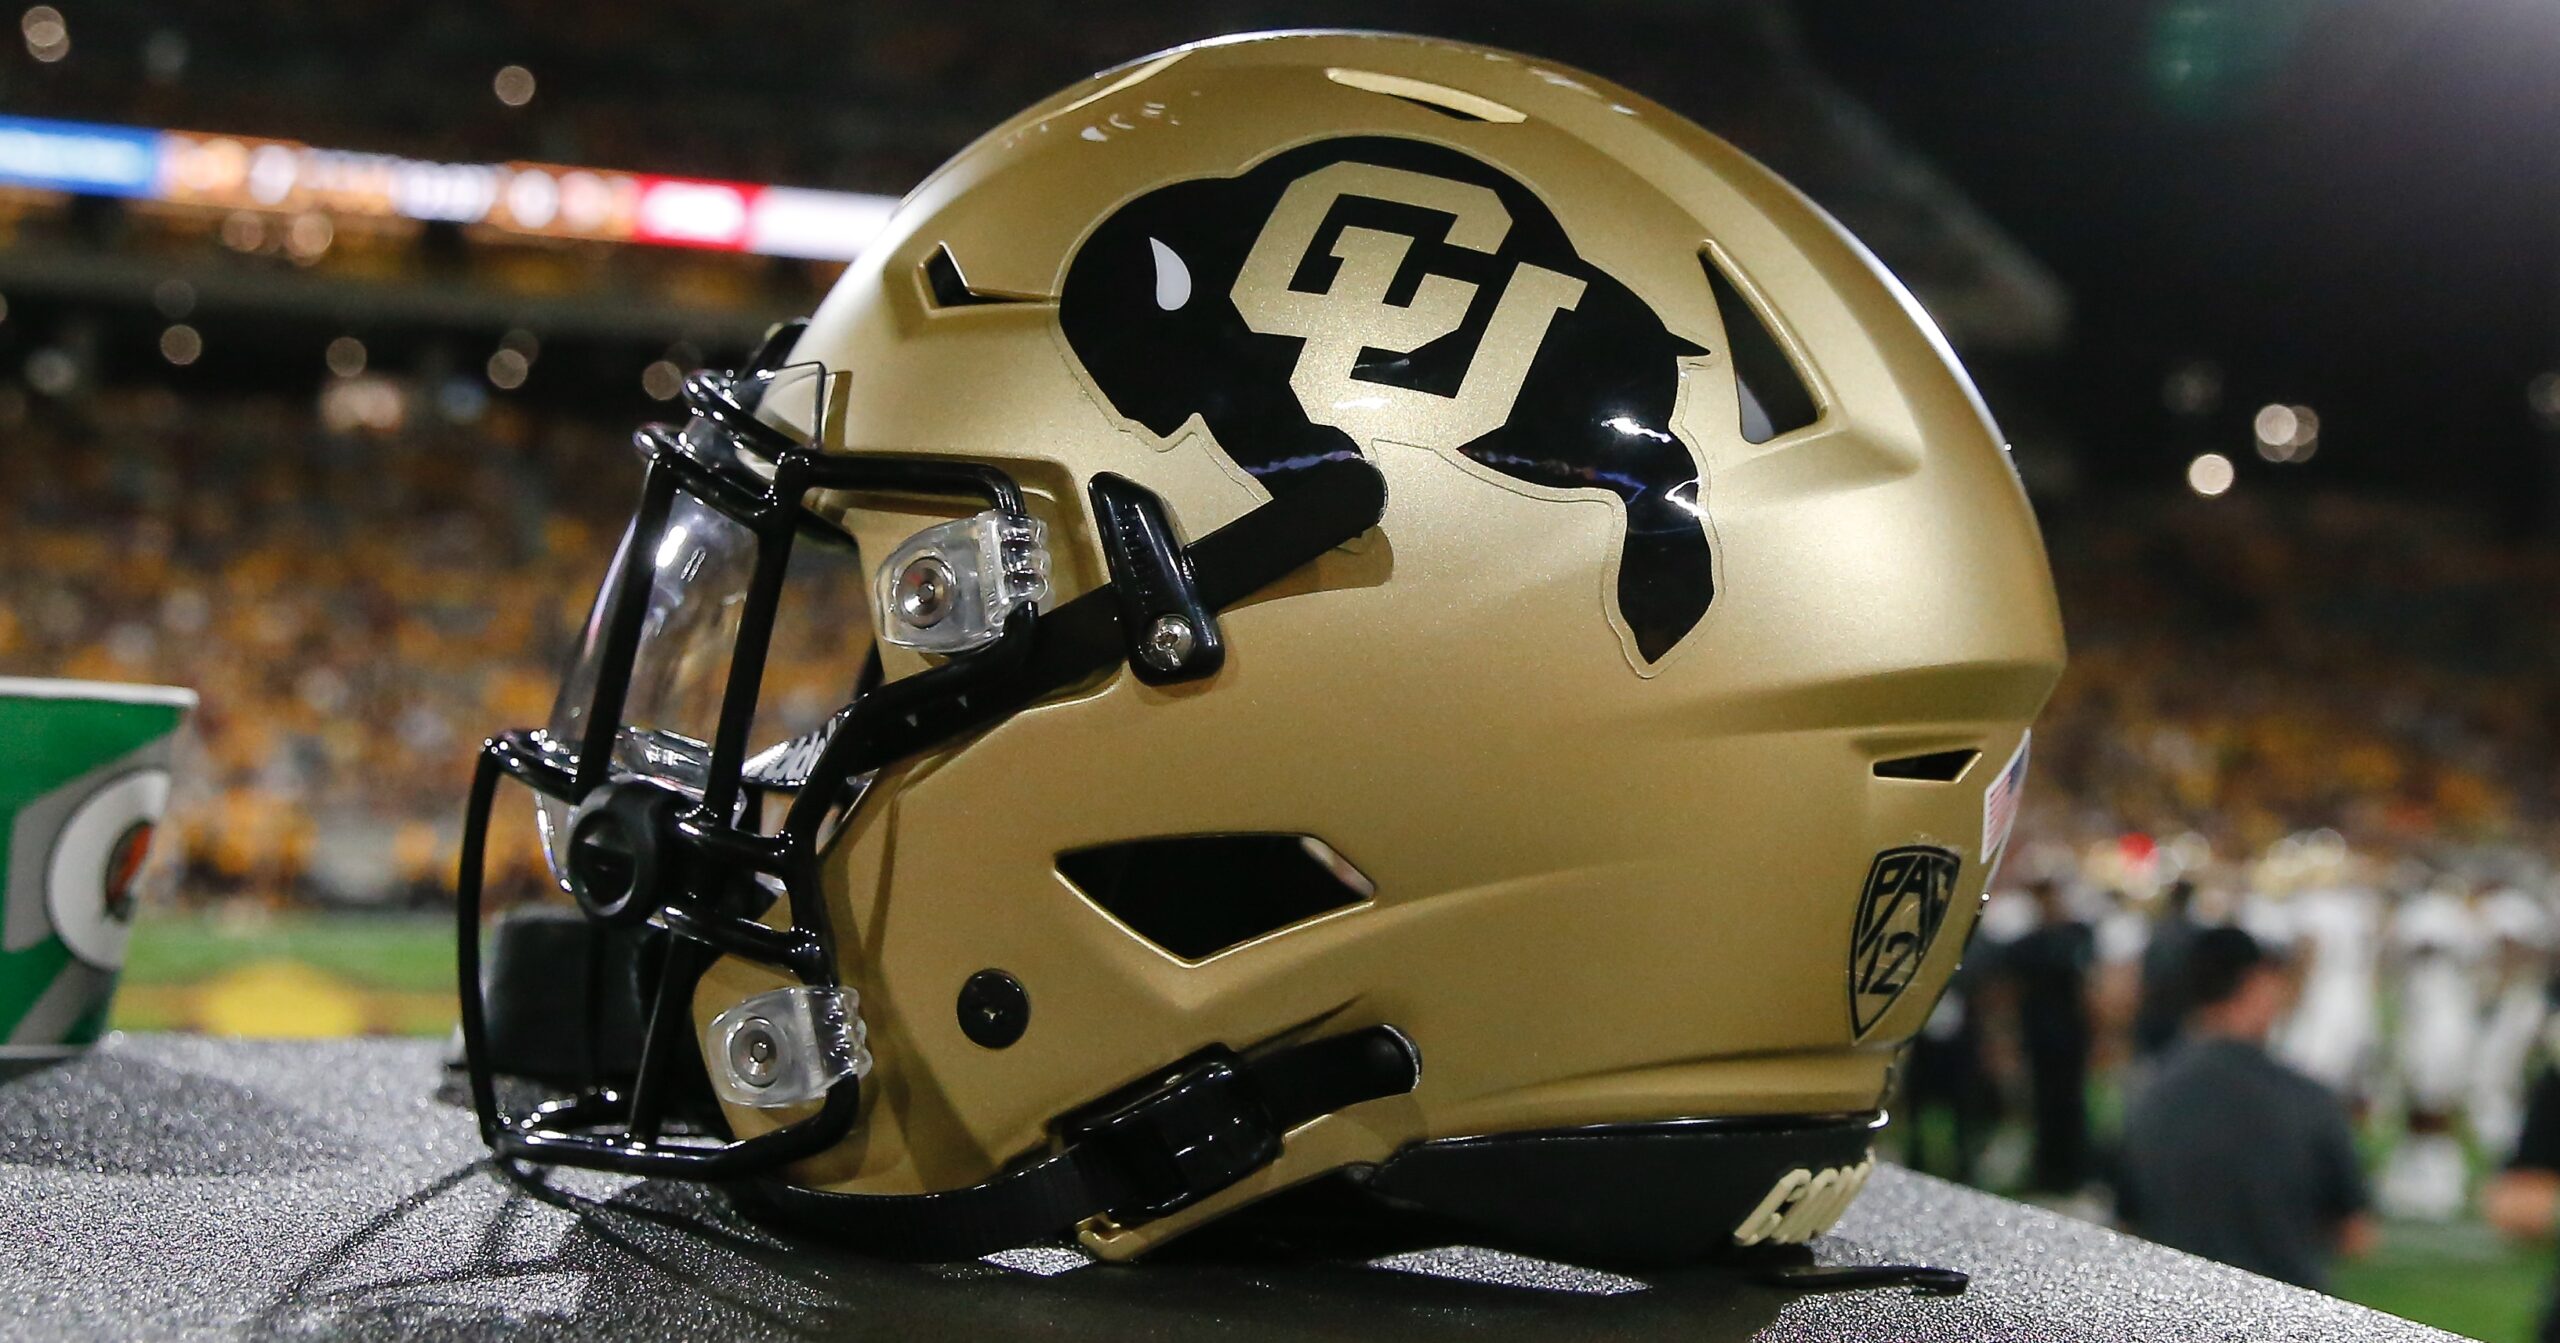 Report: Division I head coach to become Colorado offensive coordinator